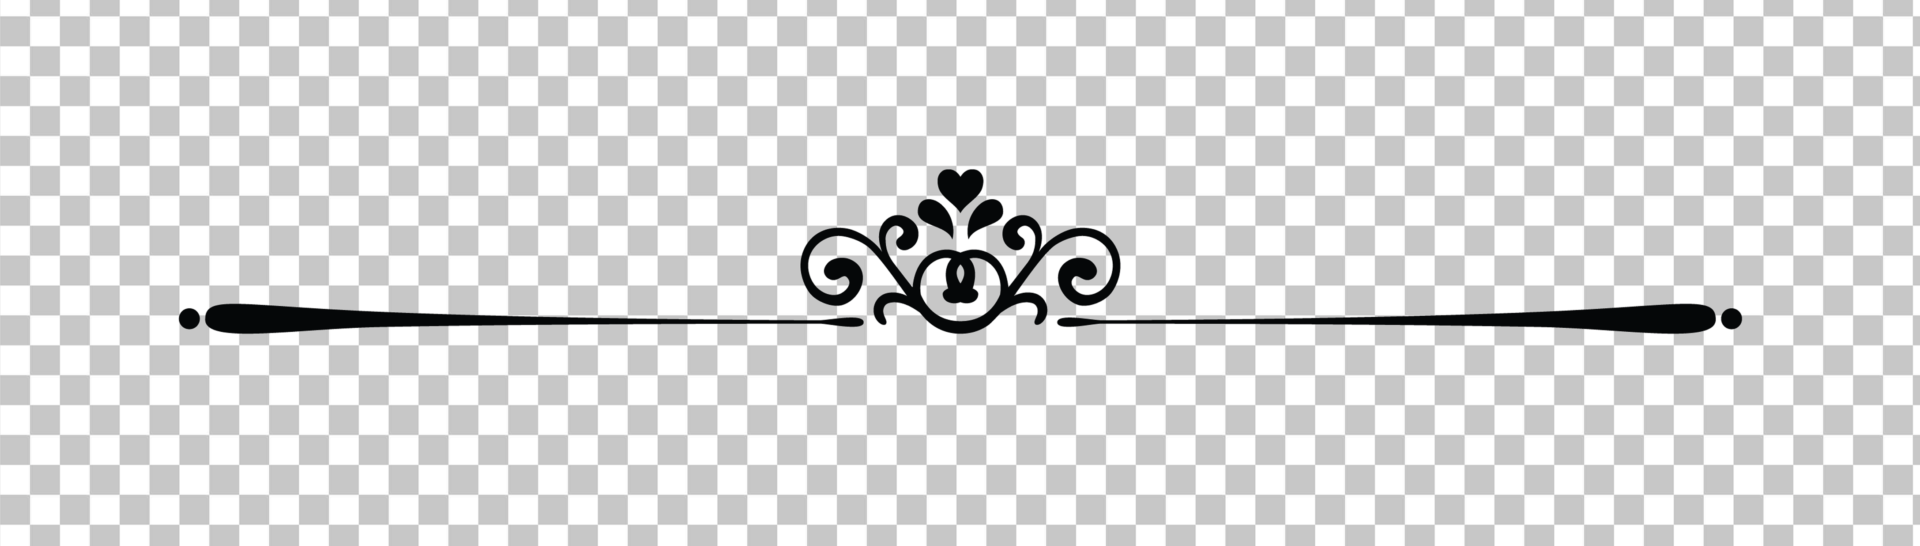 Black Divider with Crown PNG Image